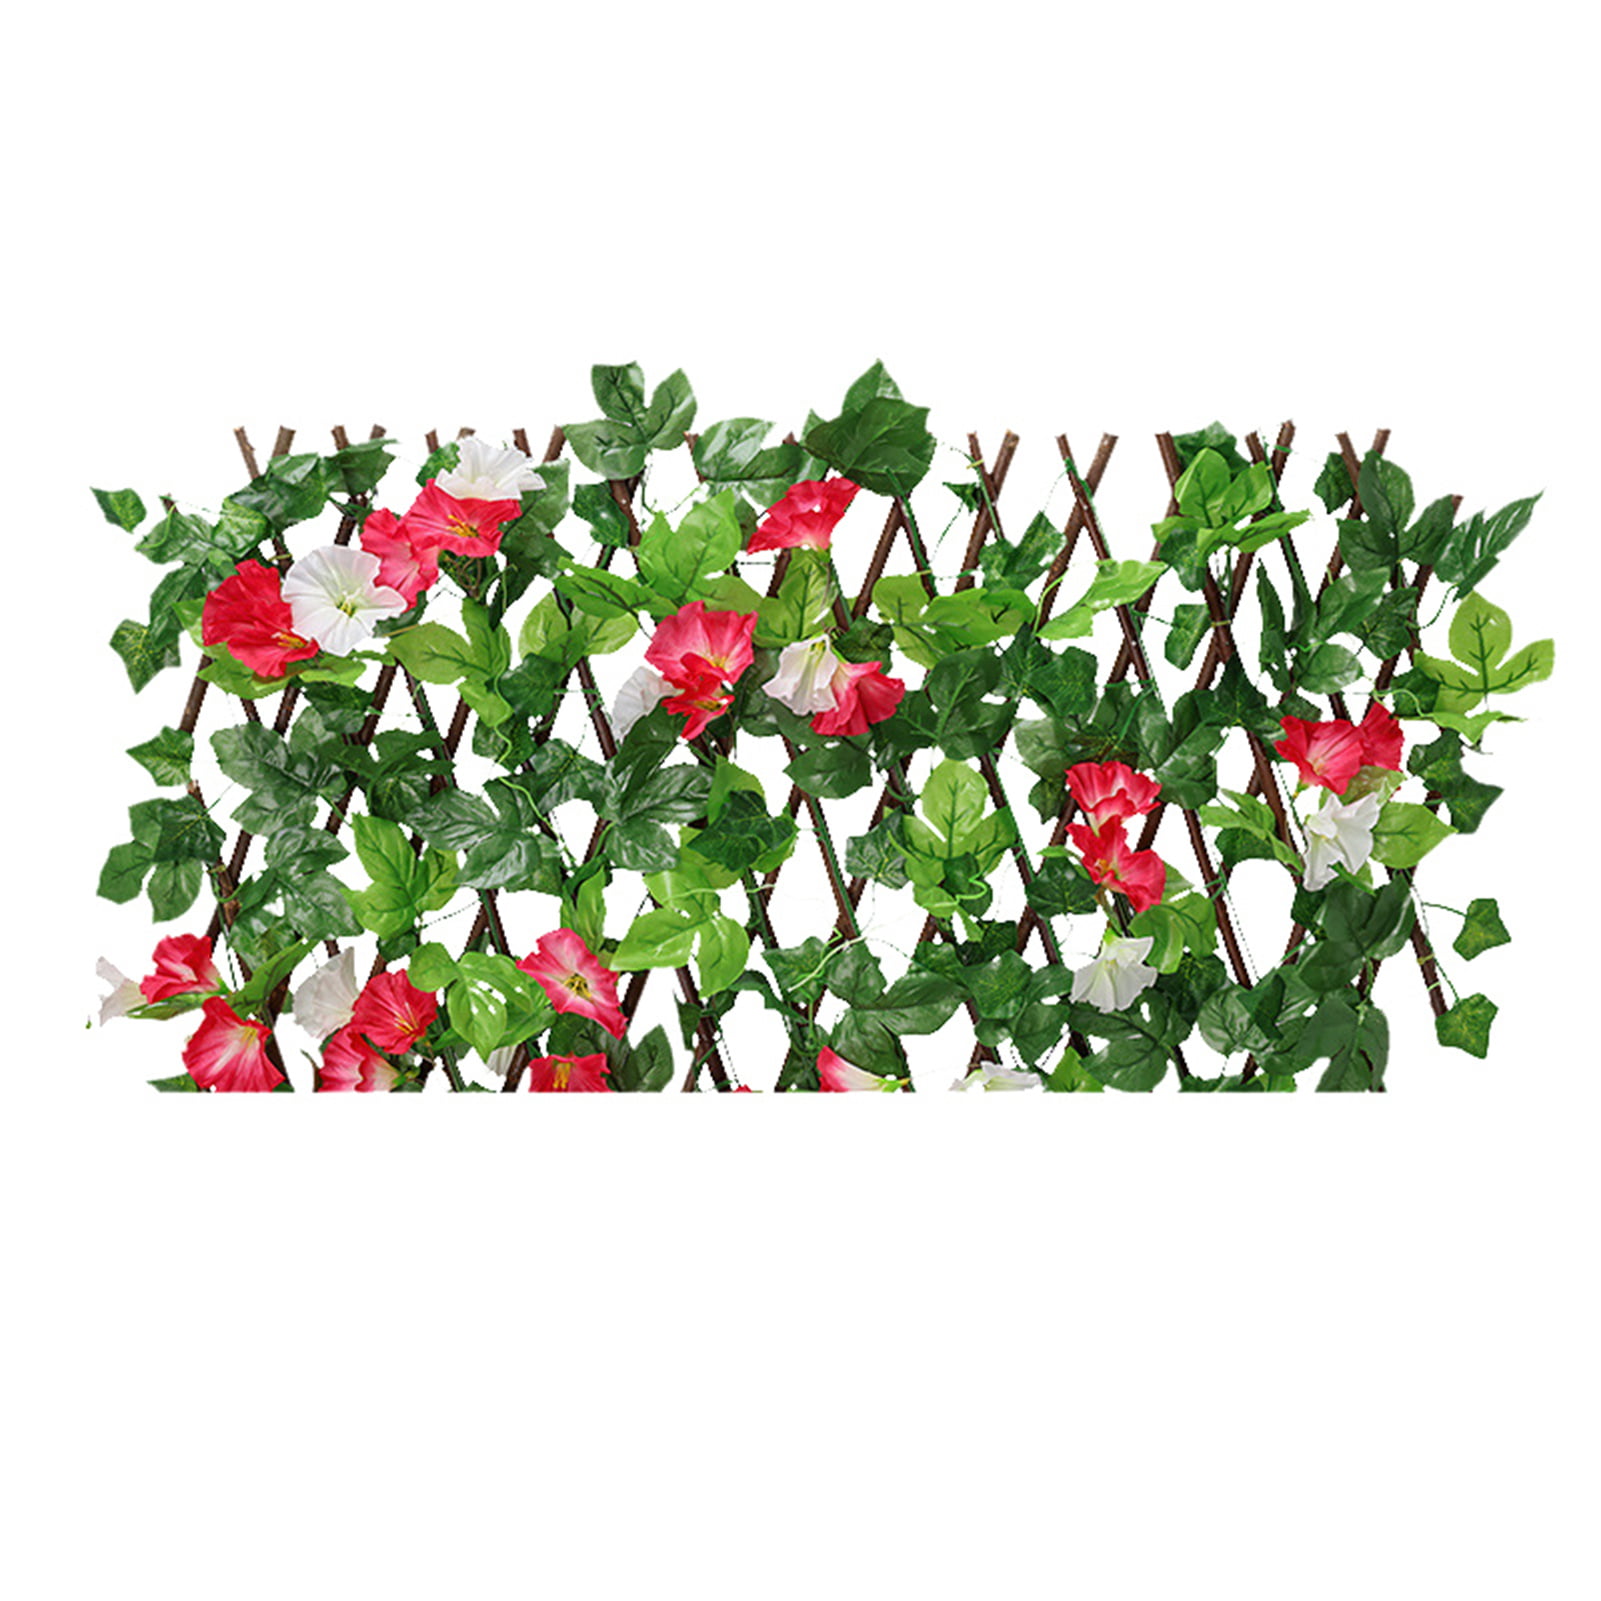 Details about   UV Protection Wooden Hedge Backyard Artificial Fence Telescopic Cloth Flowers 